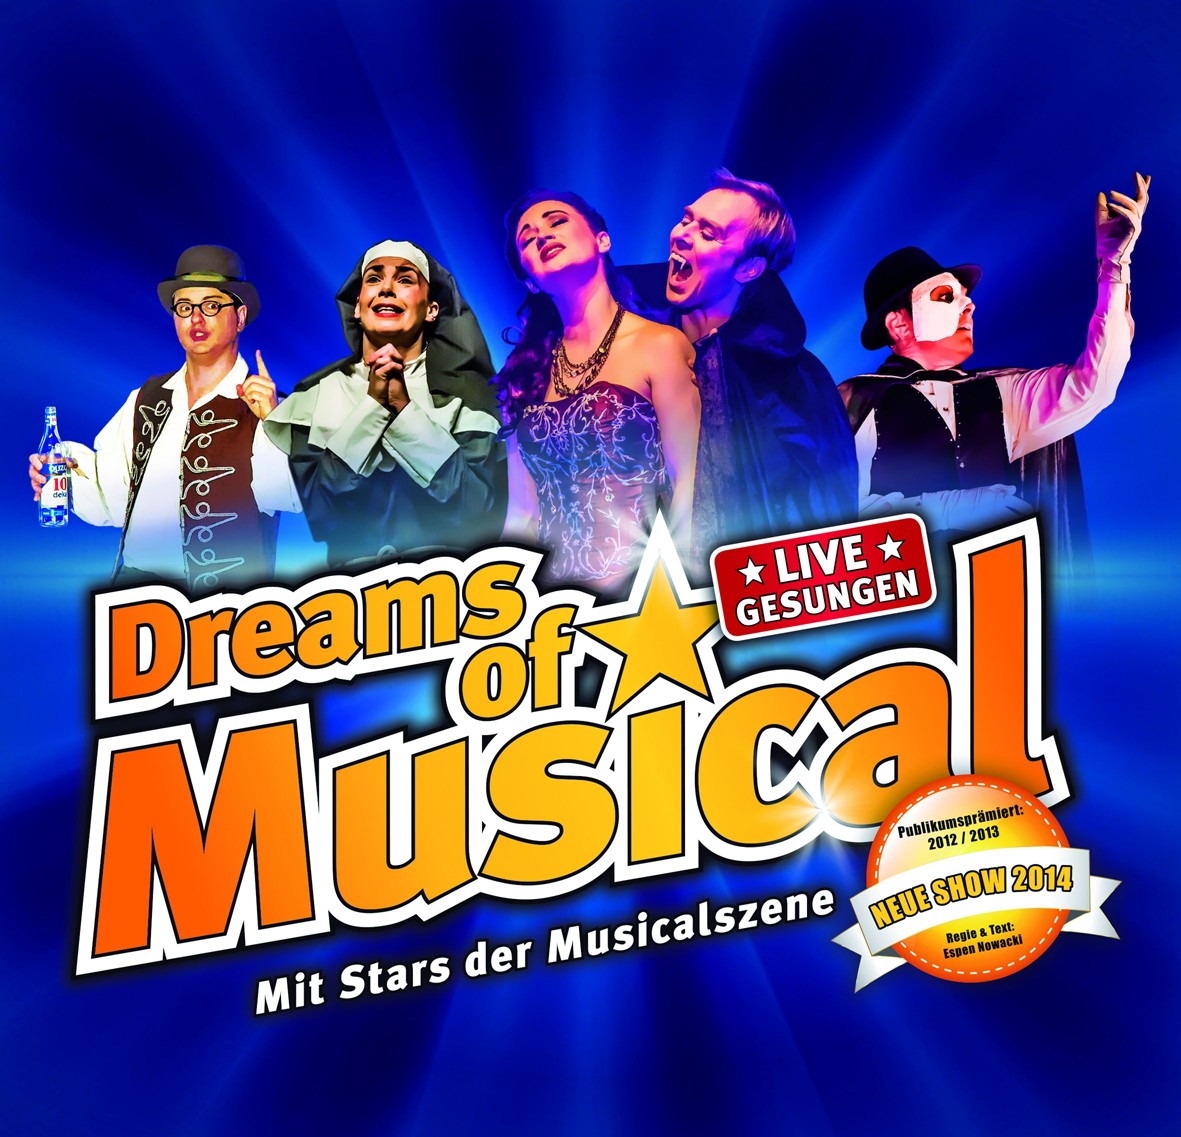 mymusical evening in the theatre